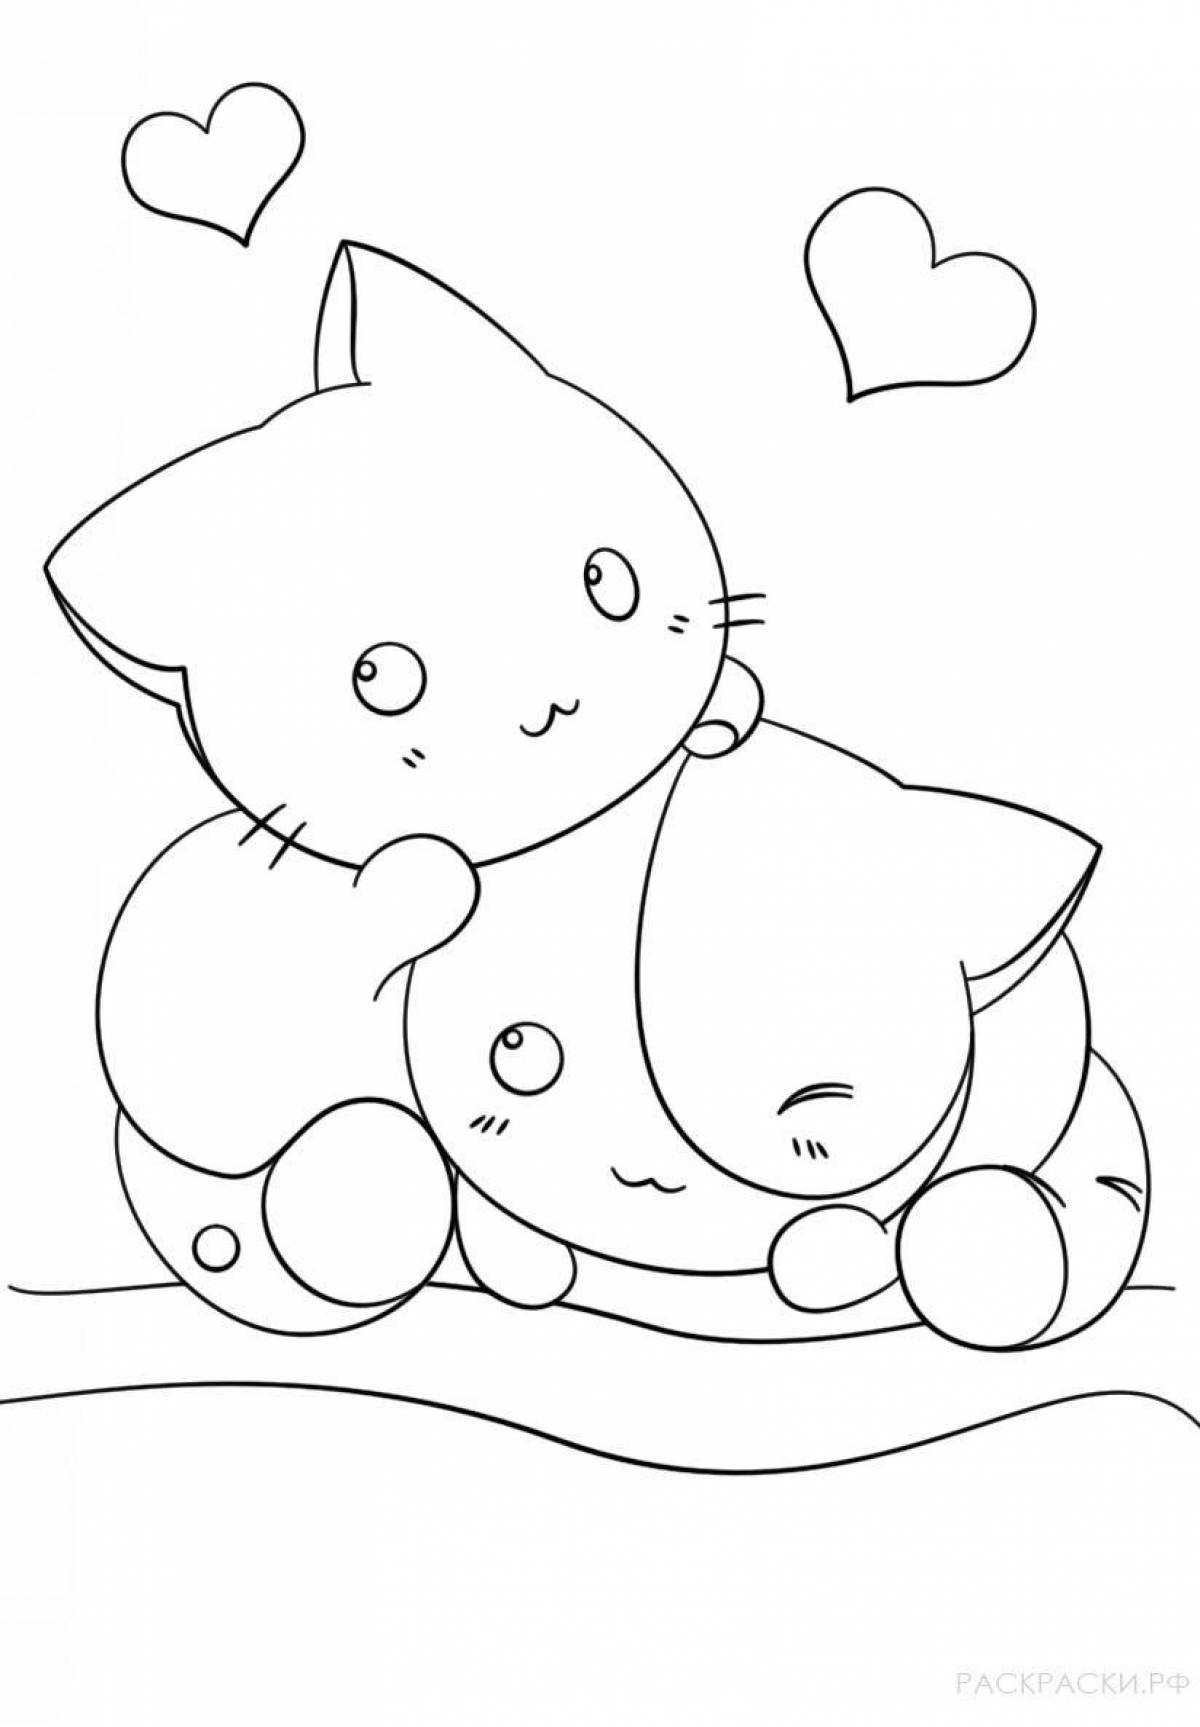 Adorable anime kittens coloring book